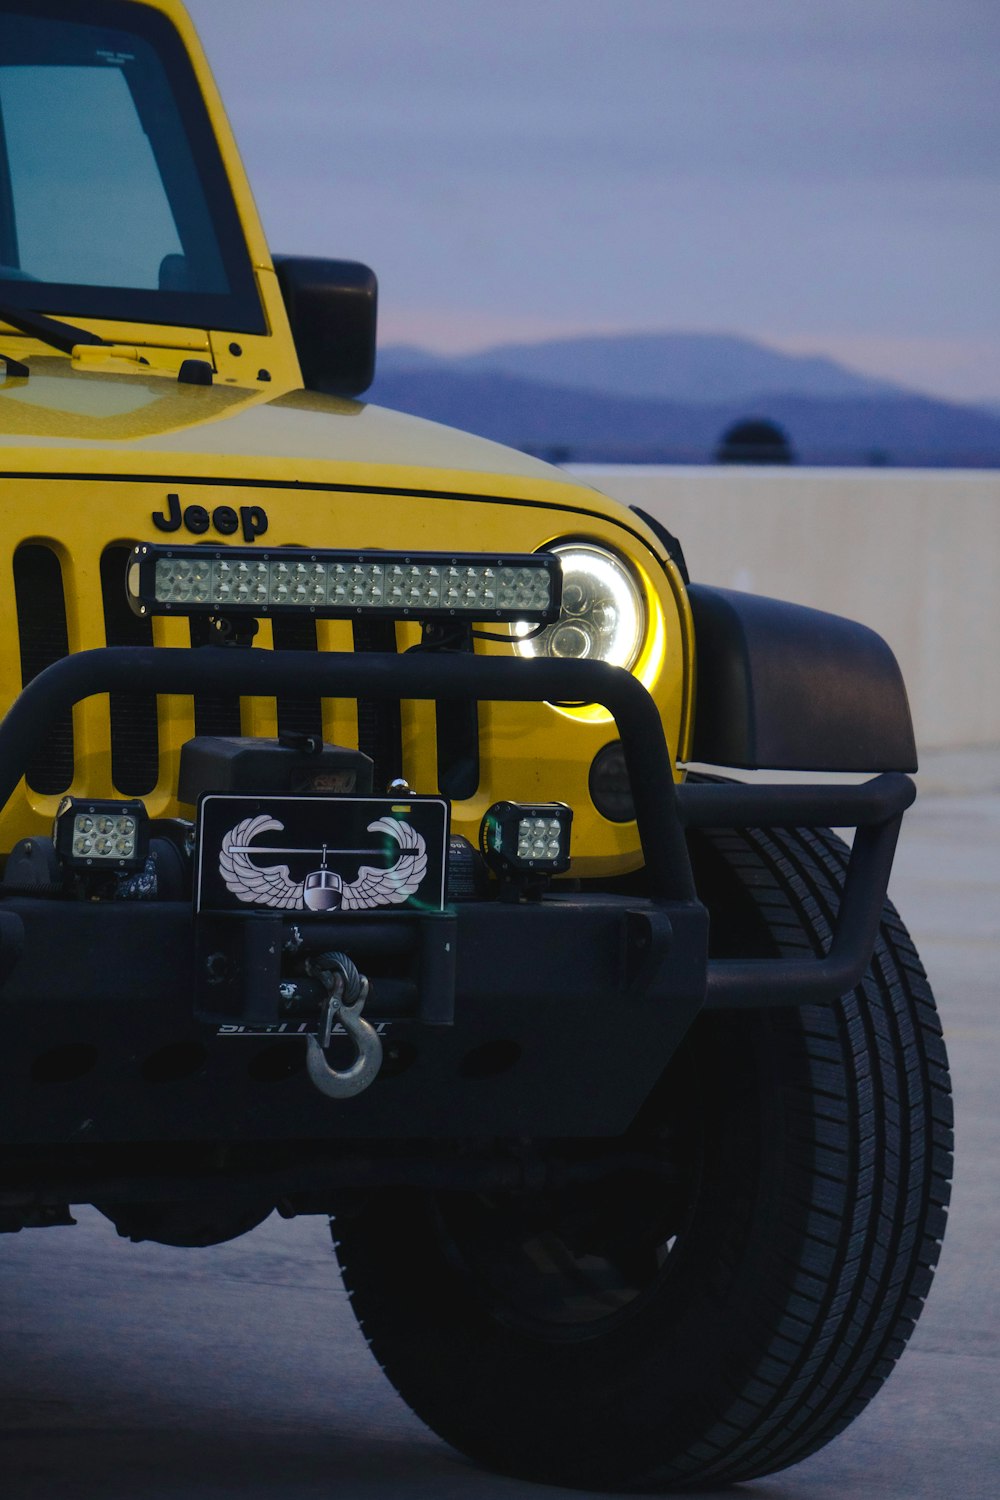 a yellow jeep is parked in a parking lot